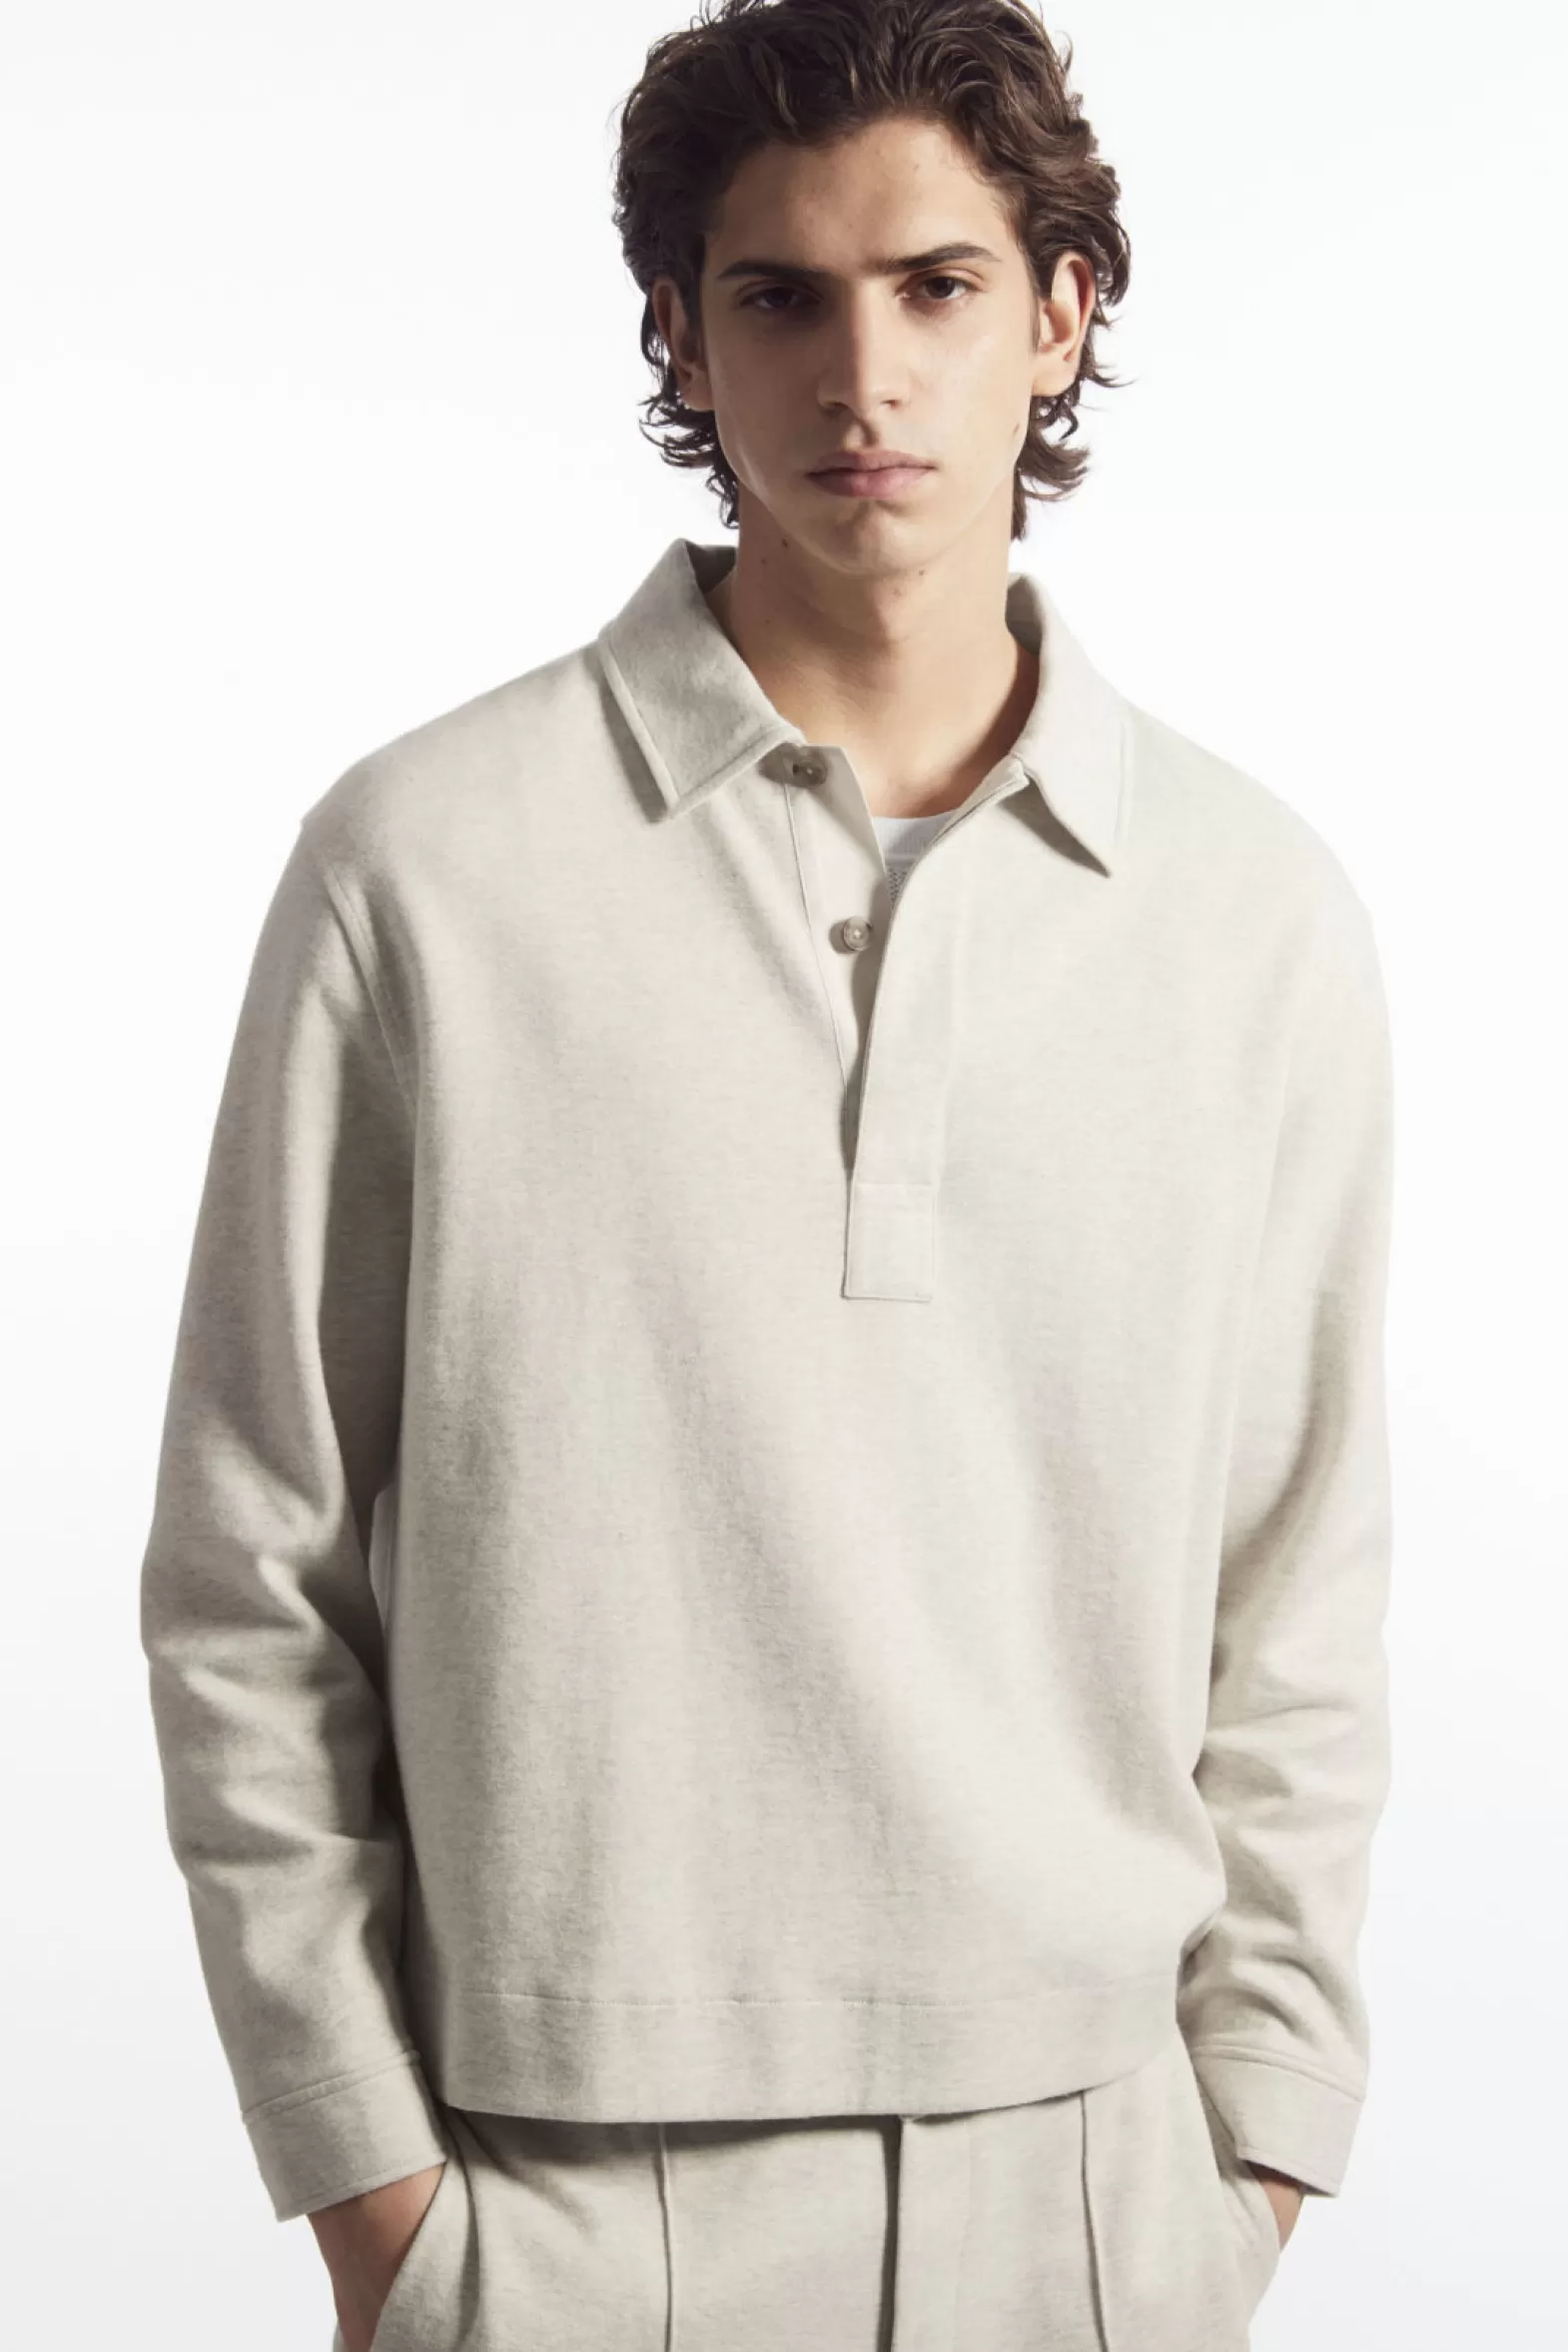 COS LONG-SLEEVED JERSEY POLO SHIRT